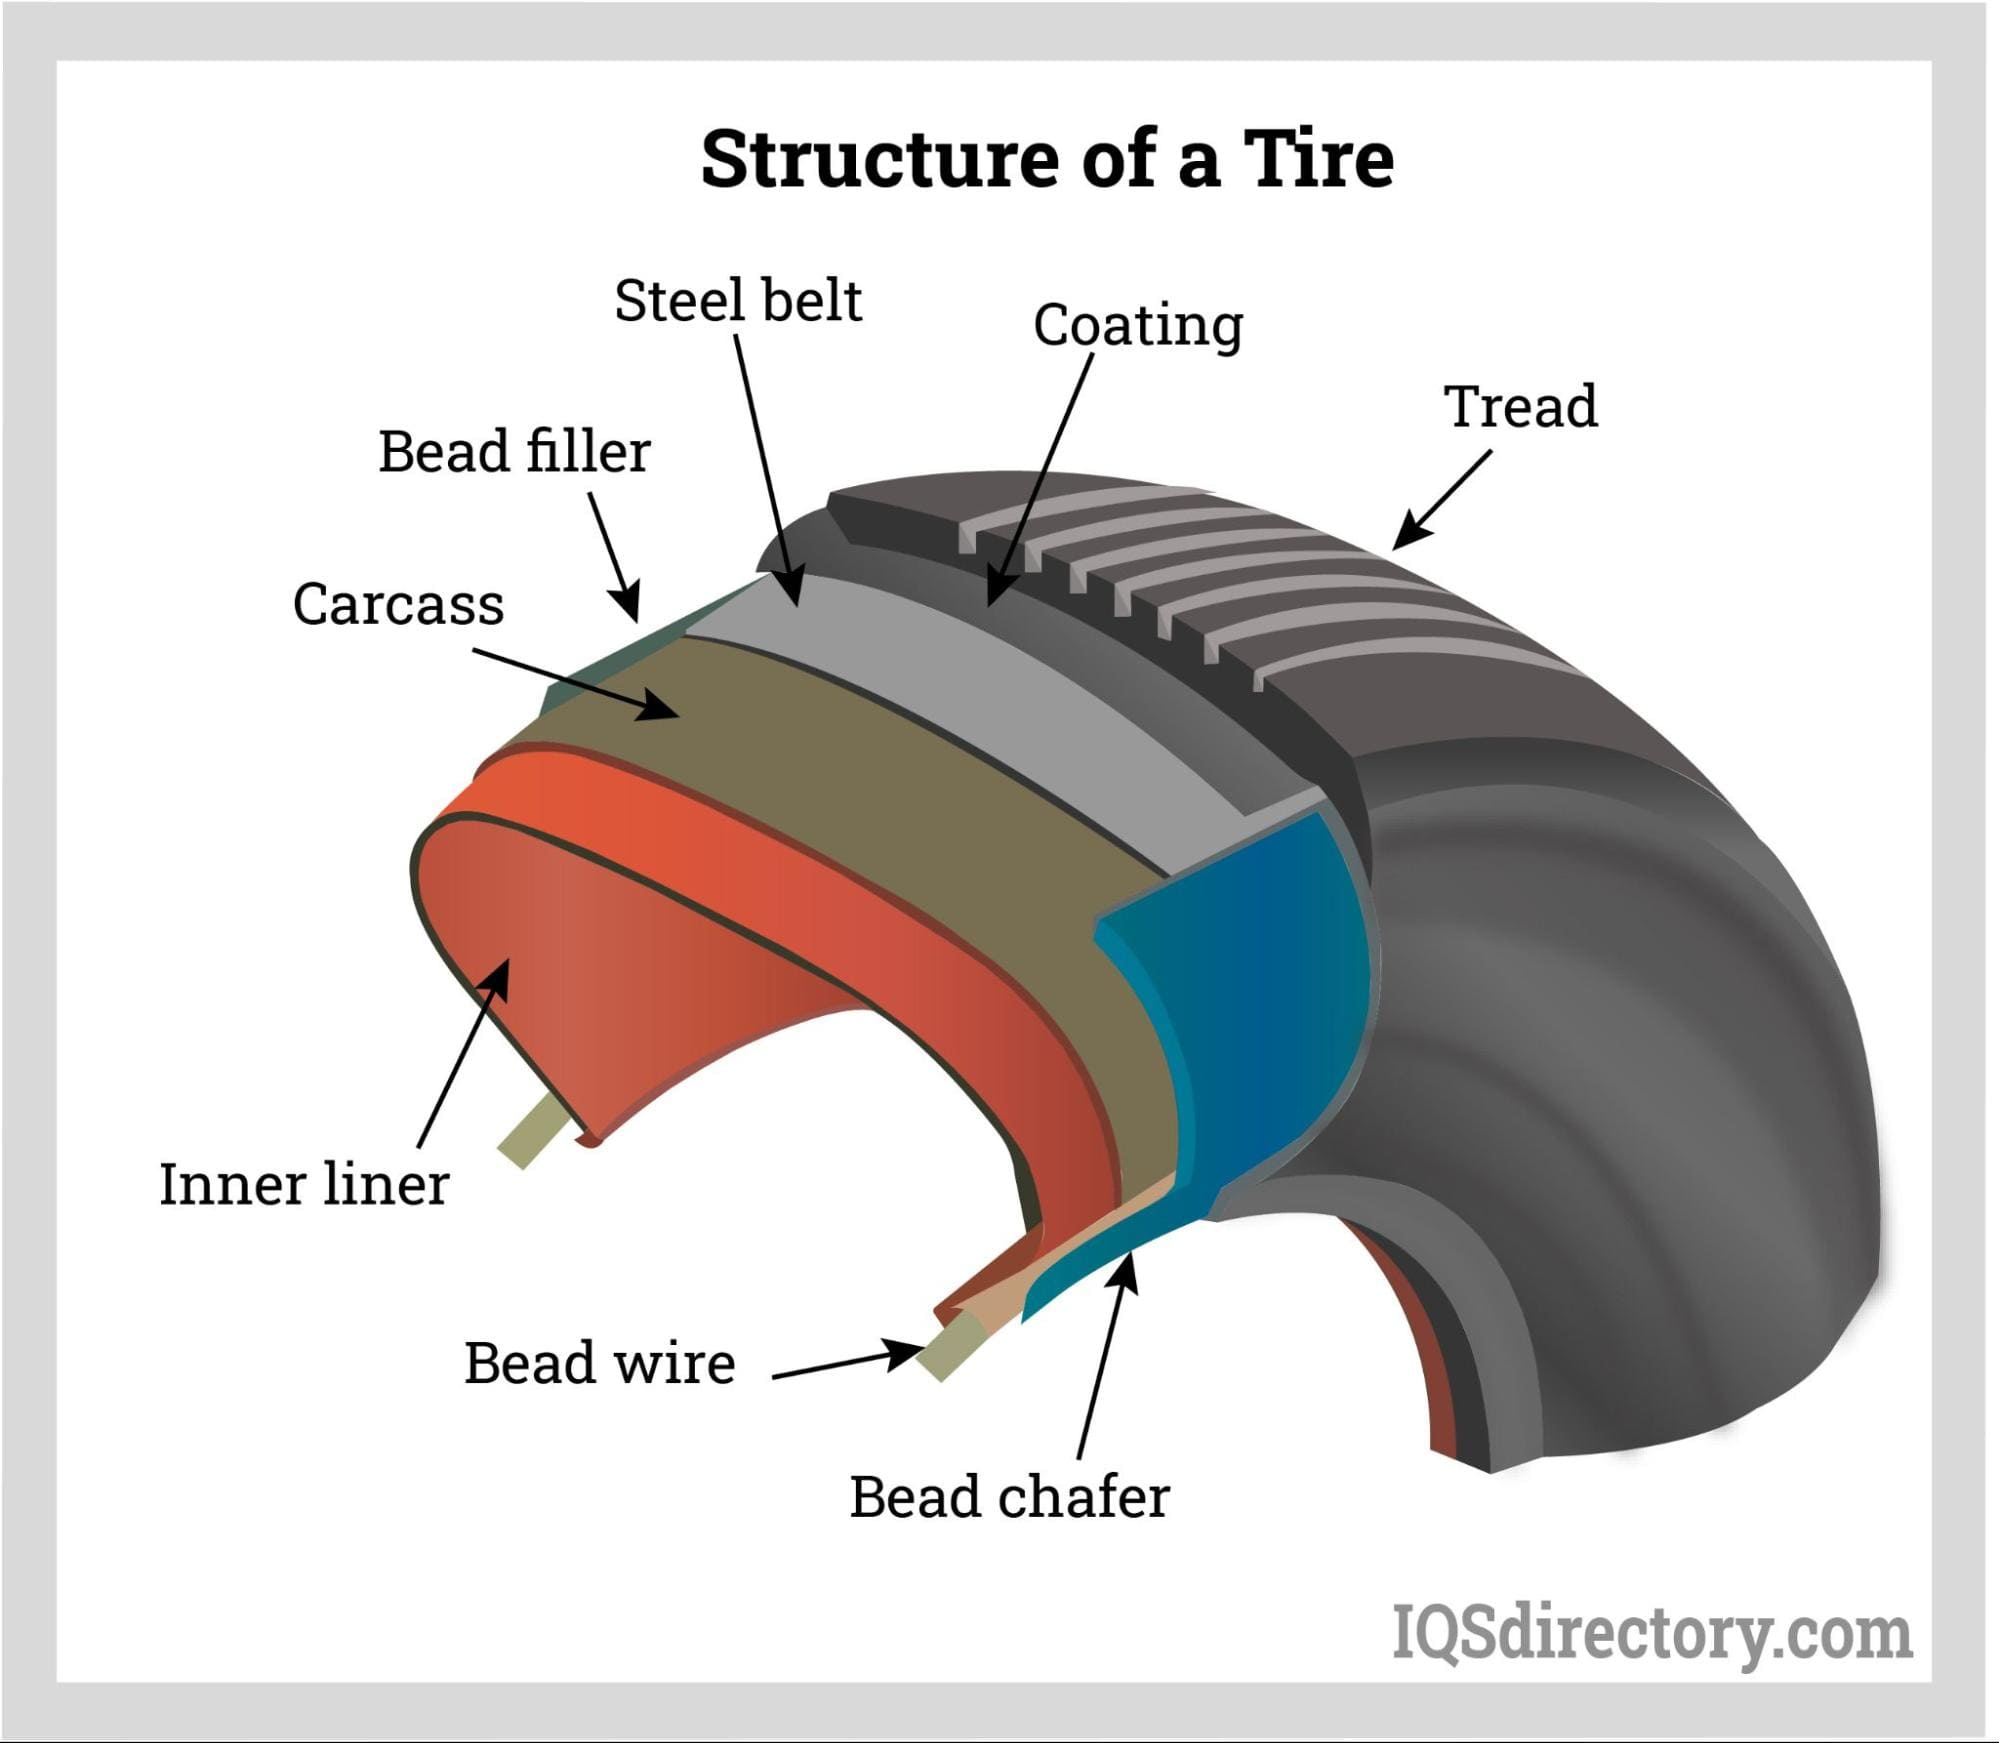 Structure of a Tire